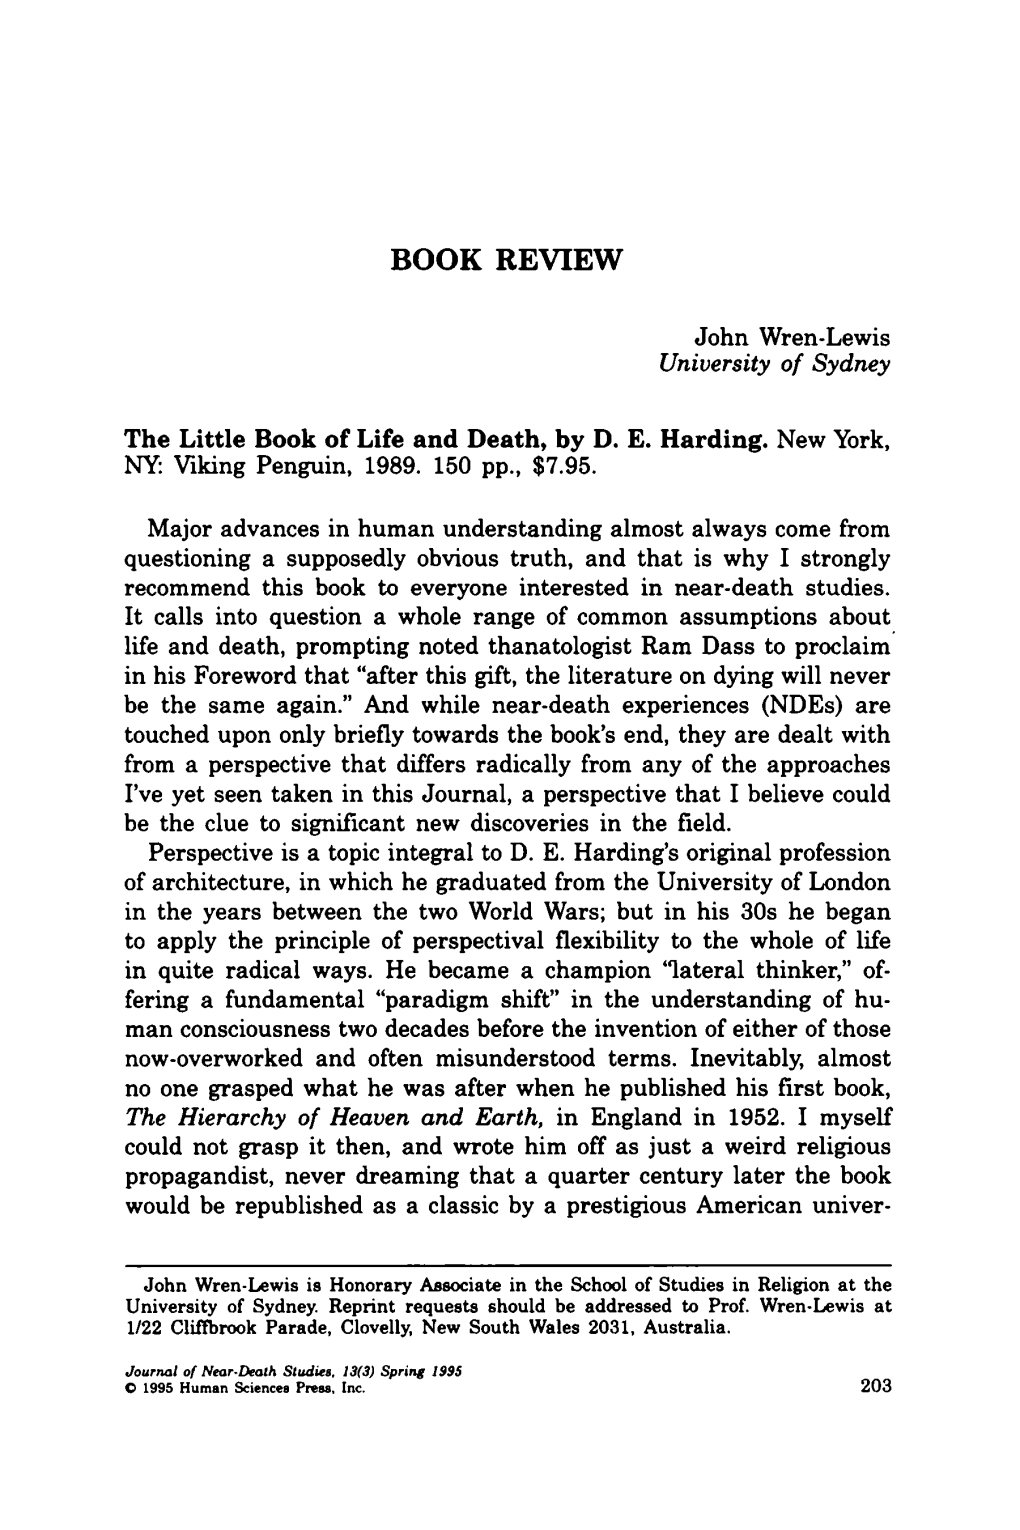 The Little Book of Life and Death, by DE Harding. New York